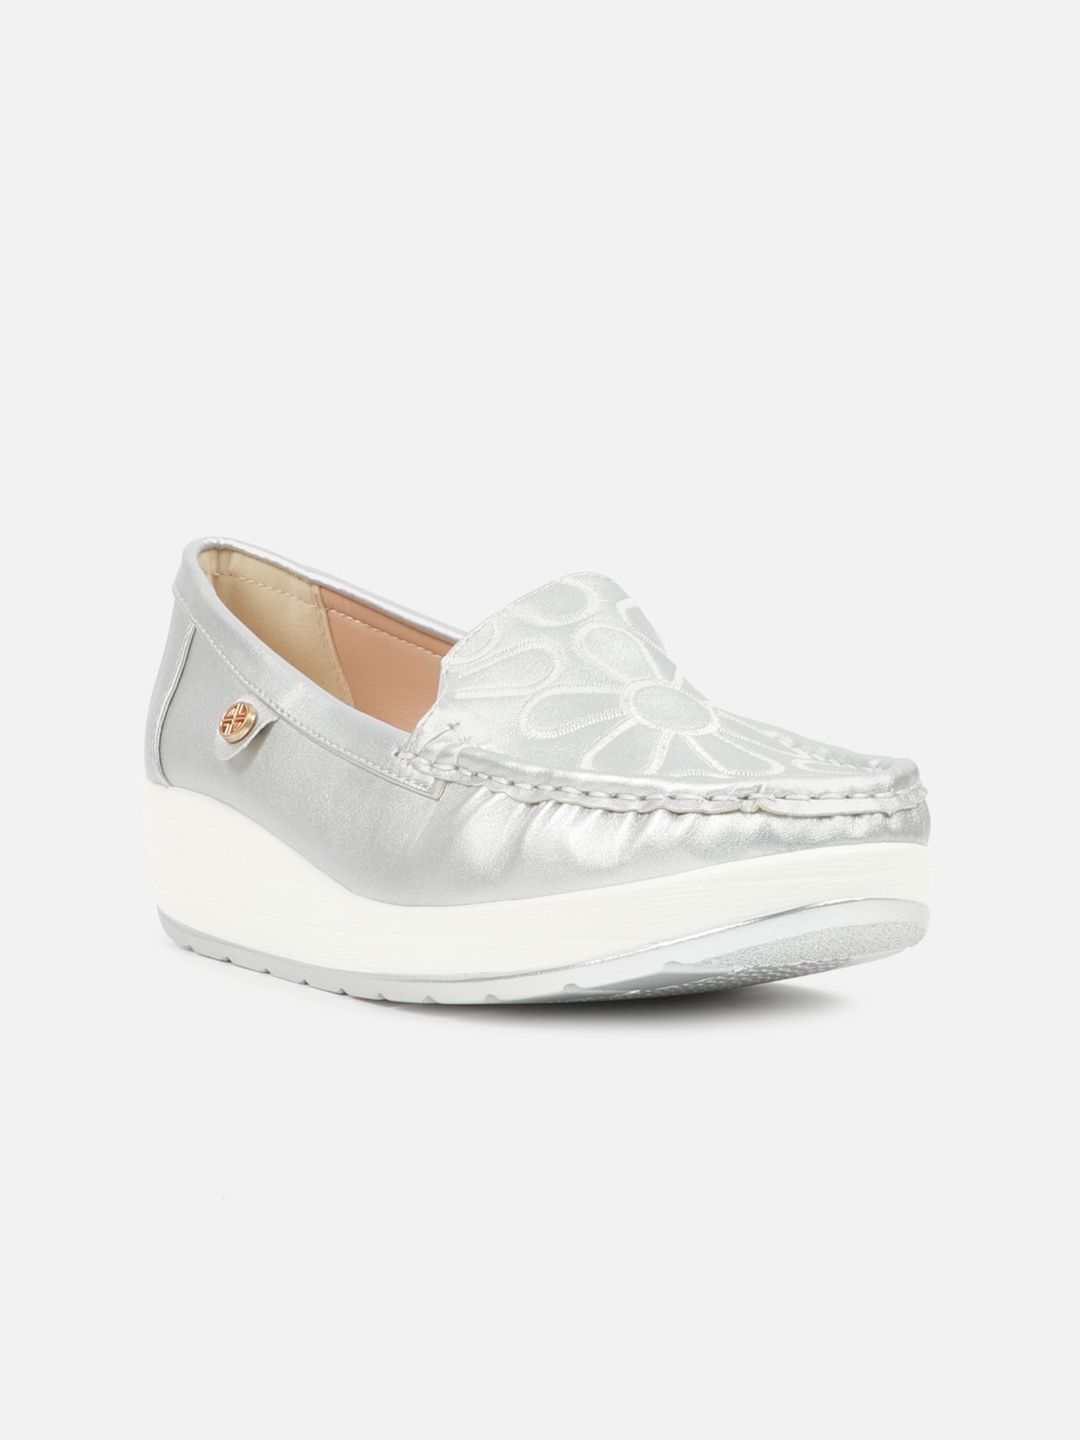 Carlton London Women Silver-Toned Loafers Price in India